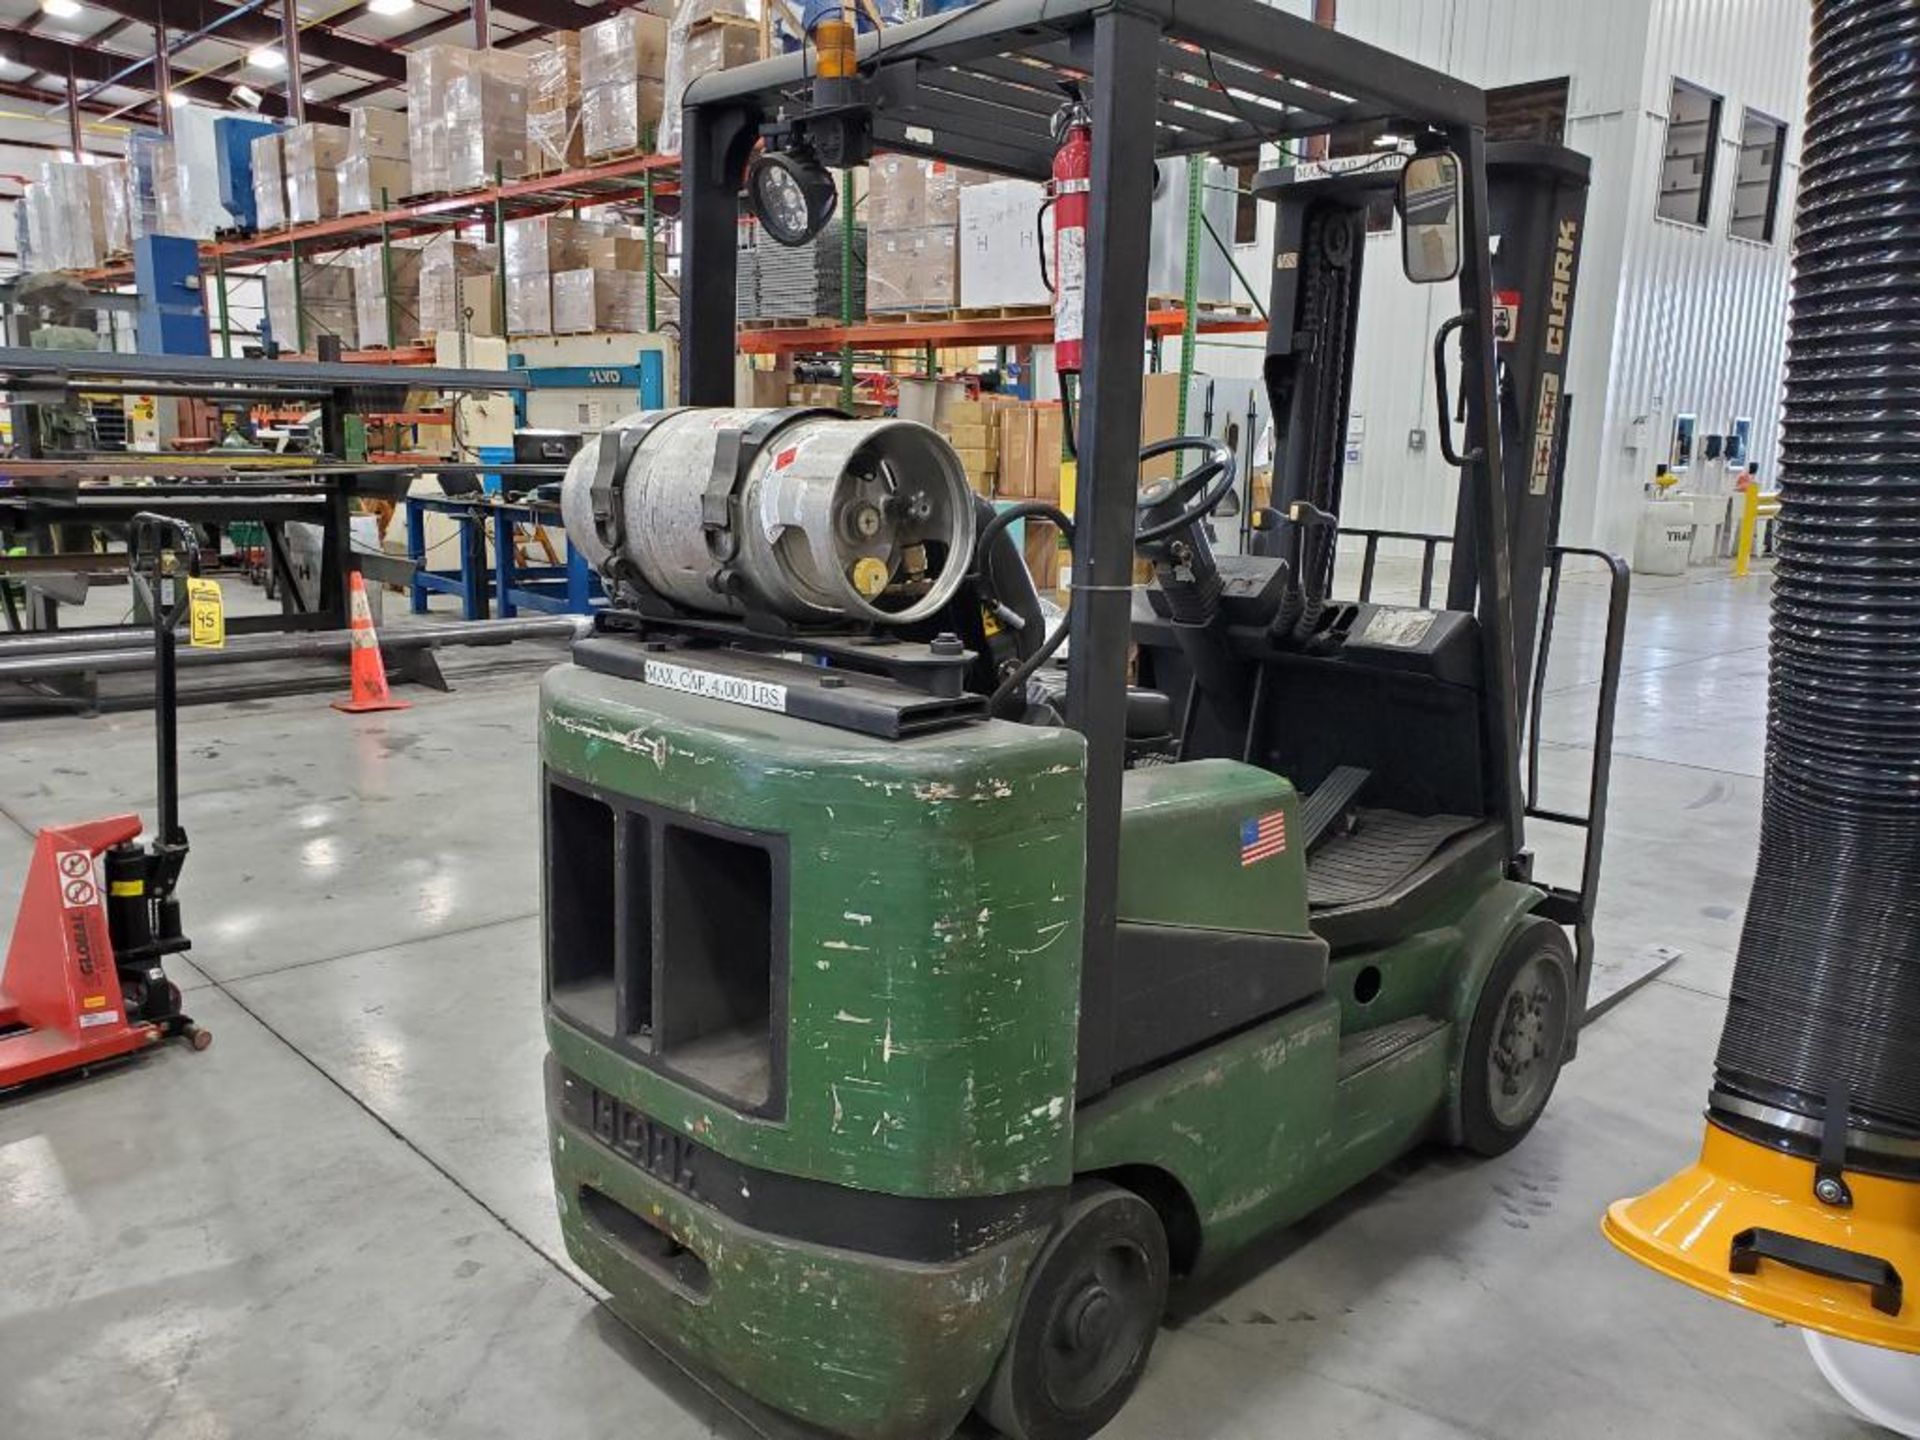 Clark 4,000 LB. Forklift, Model CGC20, S/N C365l-0052-9464FB, 130" Lift Height, 82-1/2" 2-Stage Mast - Image 6 of 10